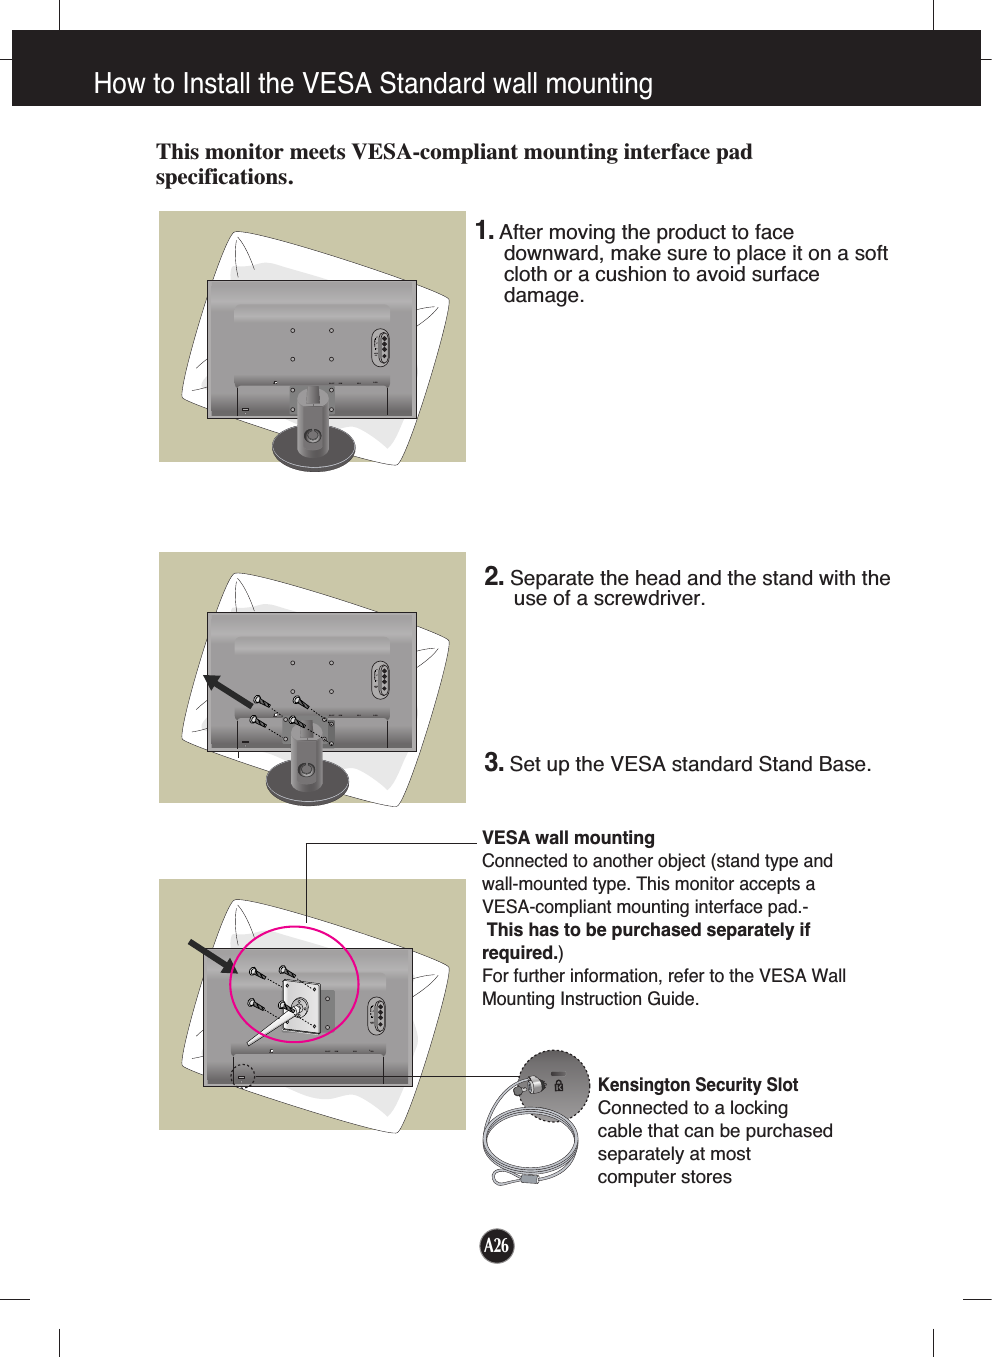 A26How to Install the VESA Standard wall mountingThis monitor meets VESA-compliant mounting interface padspecifications.DC-OUT HDMI DVI-DD-SUBAC-INAUDIOOUTCOMPONENTYPRPBDC-OUT HDMI DVI-DD-SUBAC-INAUDIOOUTCOMPONENTYPRPBDC-OUT HDMI DVI-DD-SUBAC-INAUDIOOUTCOMPONENTYPRPBVESA wall mountingConnected to another object (stand type andwall-mounted type. This monitor accepts aVESA-compliant mounting interface pad.-This has to be purchased separately ifrequired.)For further information, refer to the VESA WallMounting Instruction Guide.Kensington Security SlotConnected to a locking cable that can be purchasedseparately at most computer stores1.After moving the product to facedownward, make sure to place it on a softcloth or a cushion to avoid surfacedamage.  2. Separate the head and the stand with theuse of a screwdriver.3.Set up the VESA standard Stand Base.